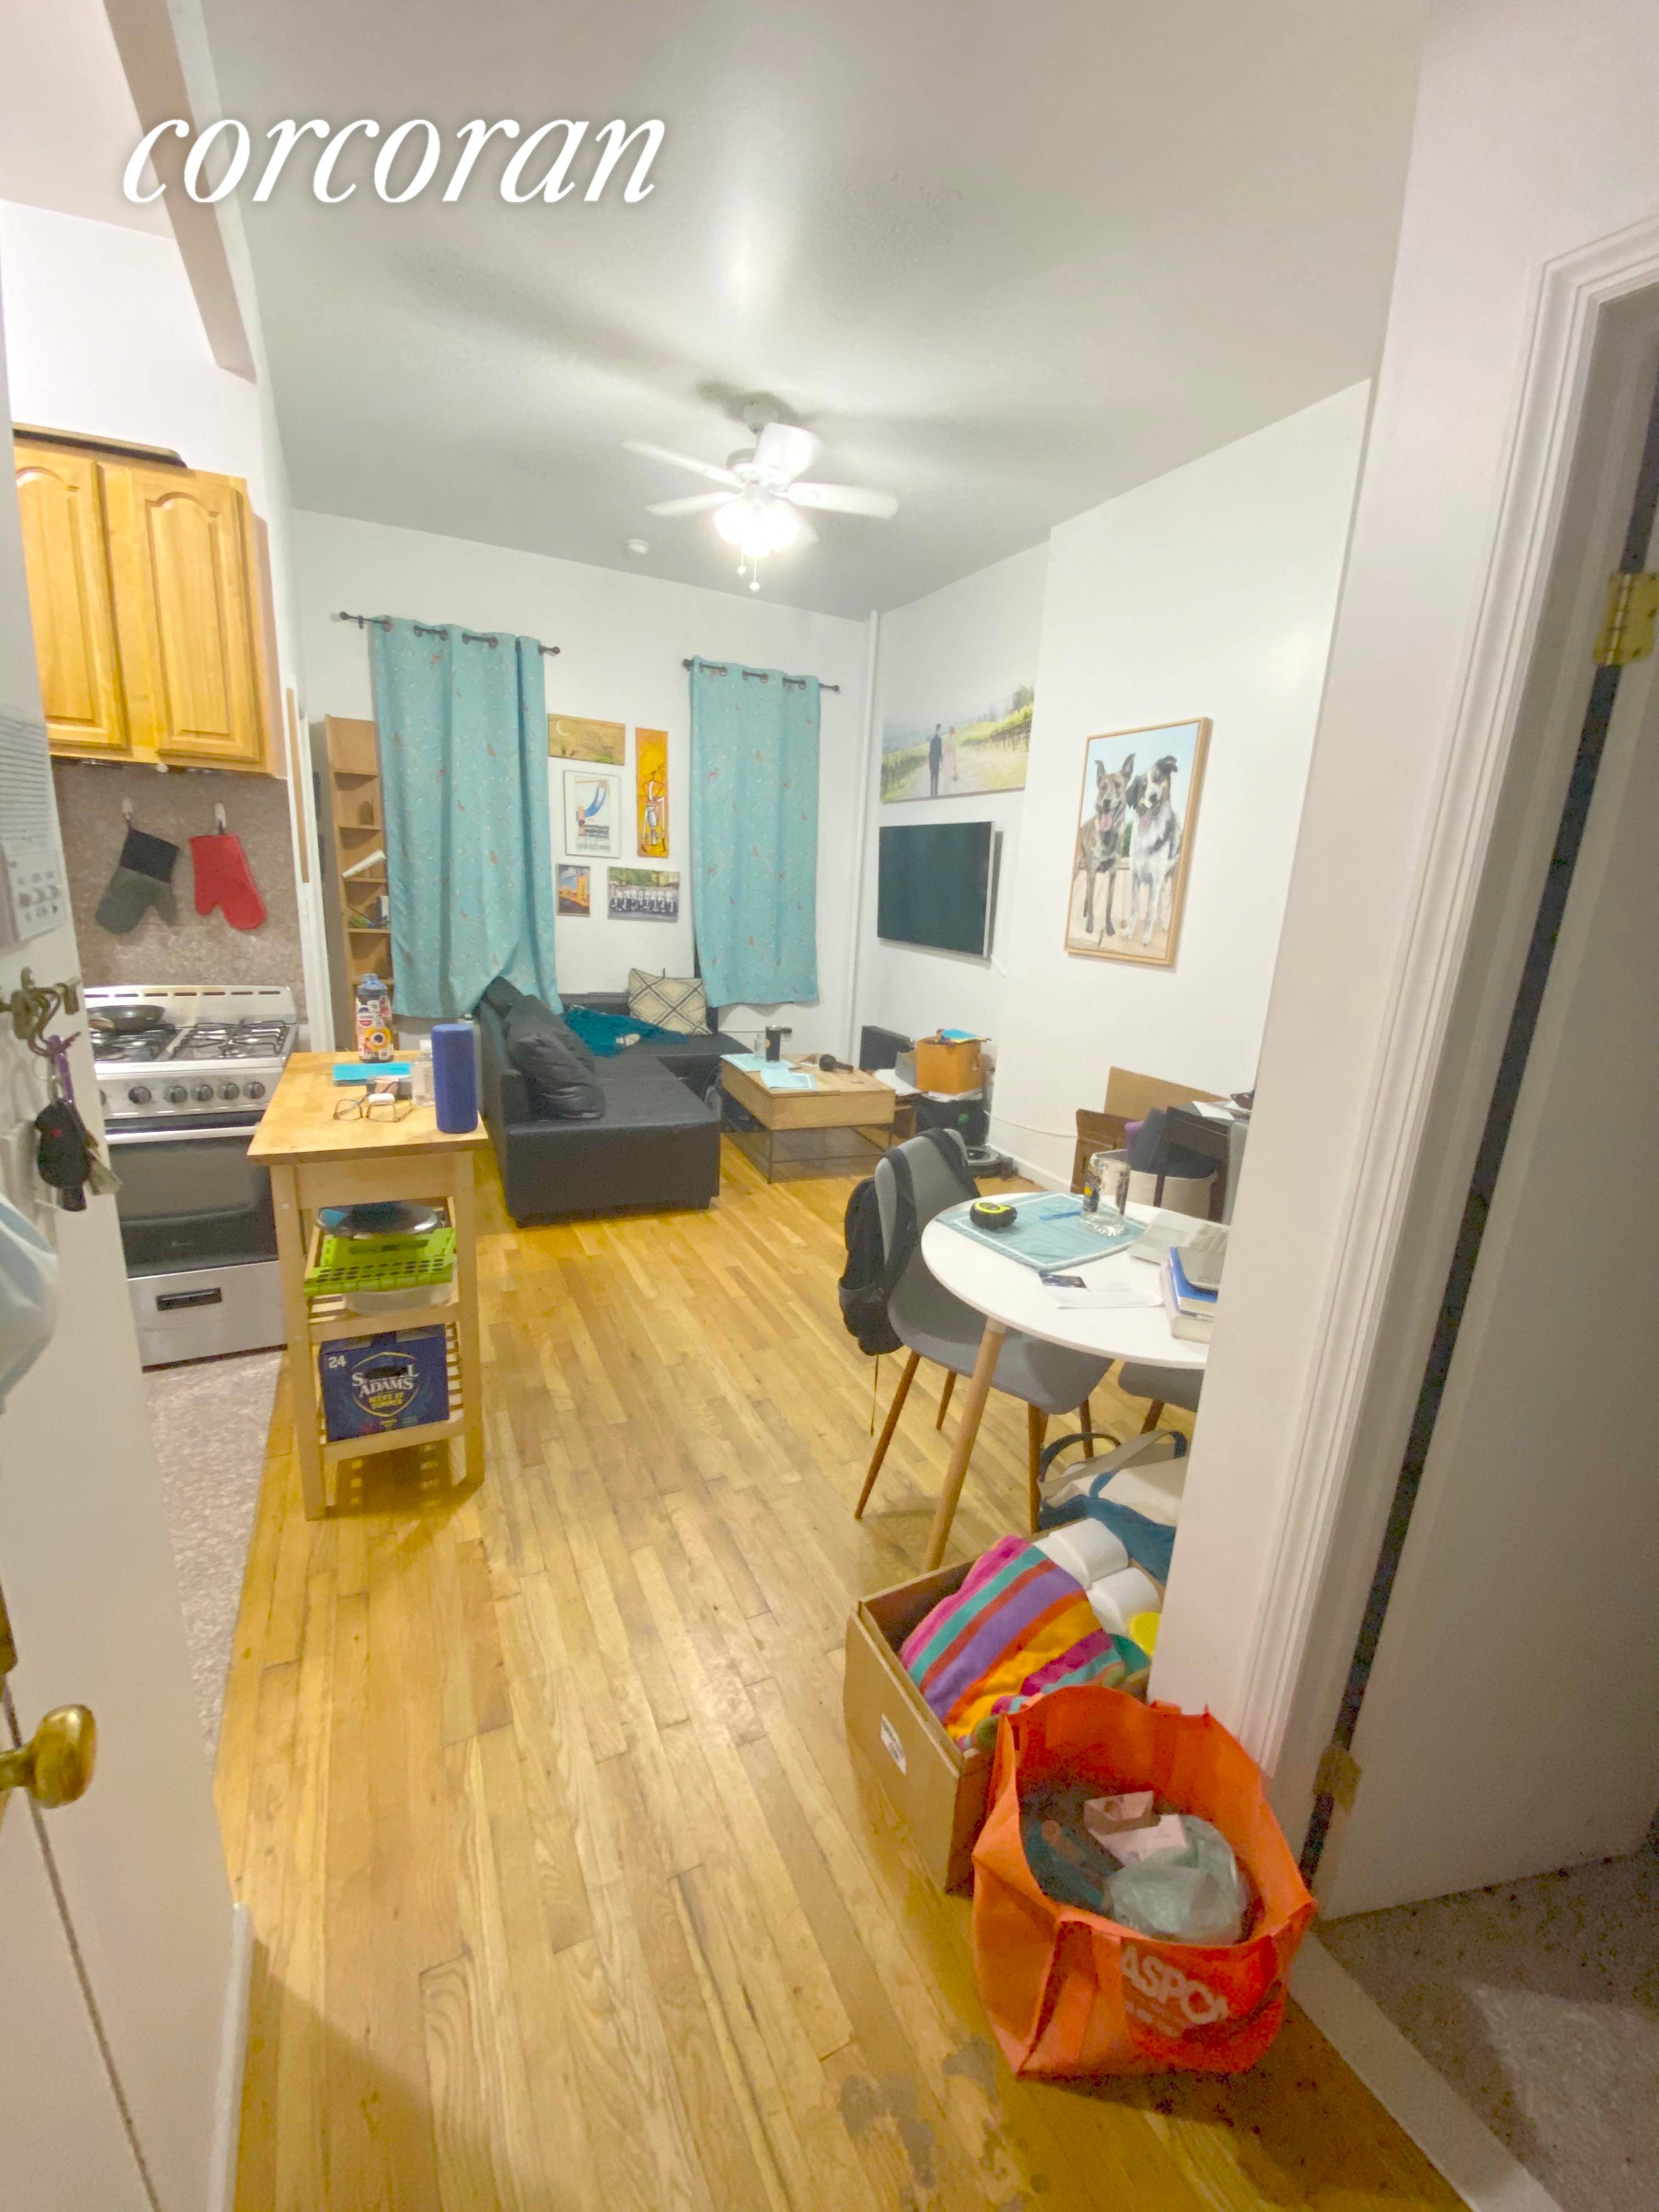 Large one bedroom home with newly remodeled kitchen conveniently located on West 70th Street.